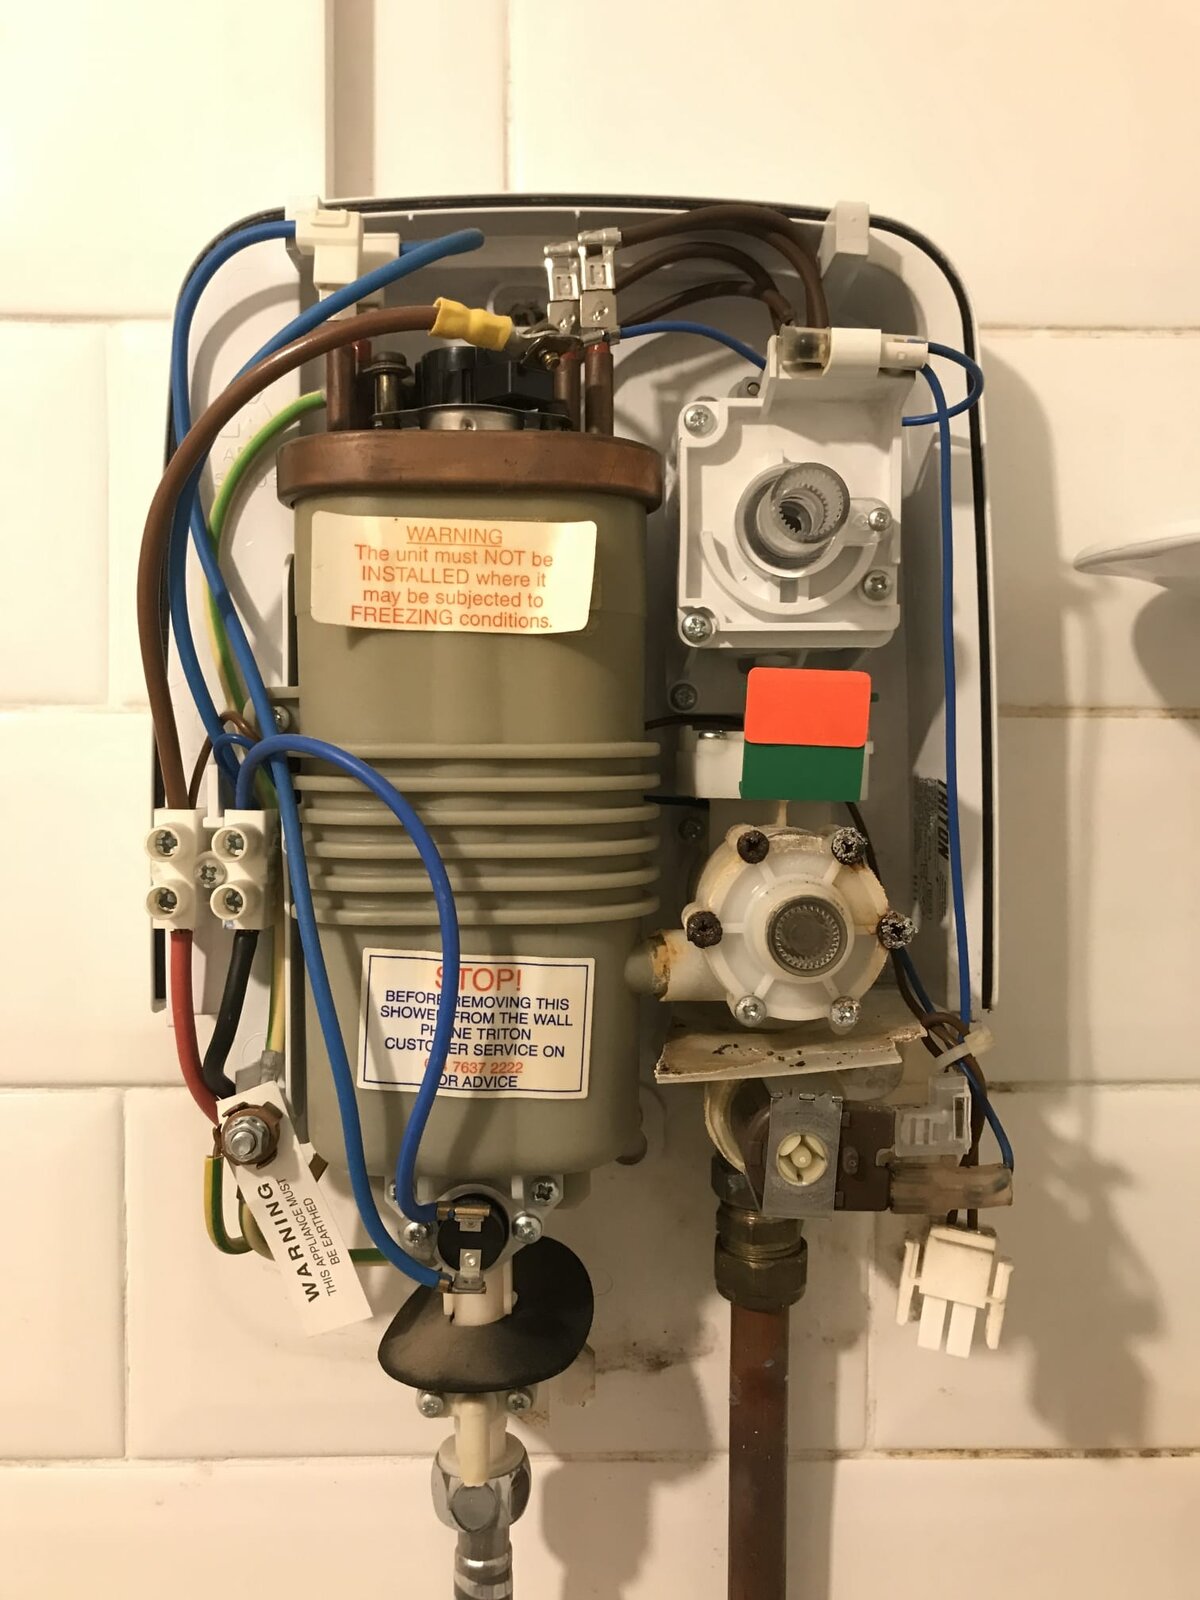 Triton Shower dripping when power off | DIYnot Forums